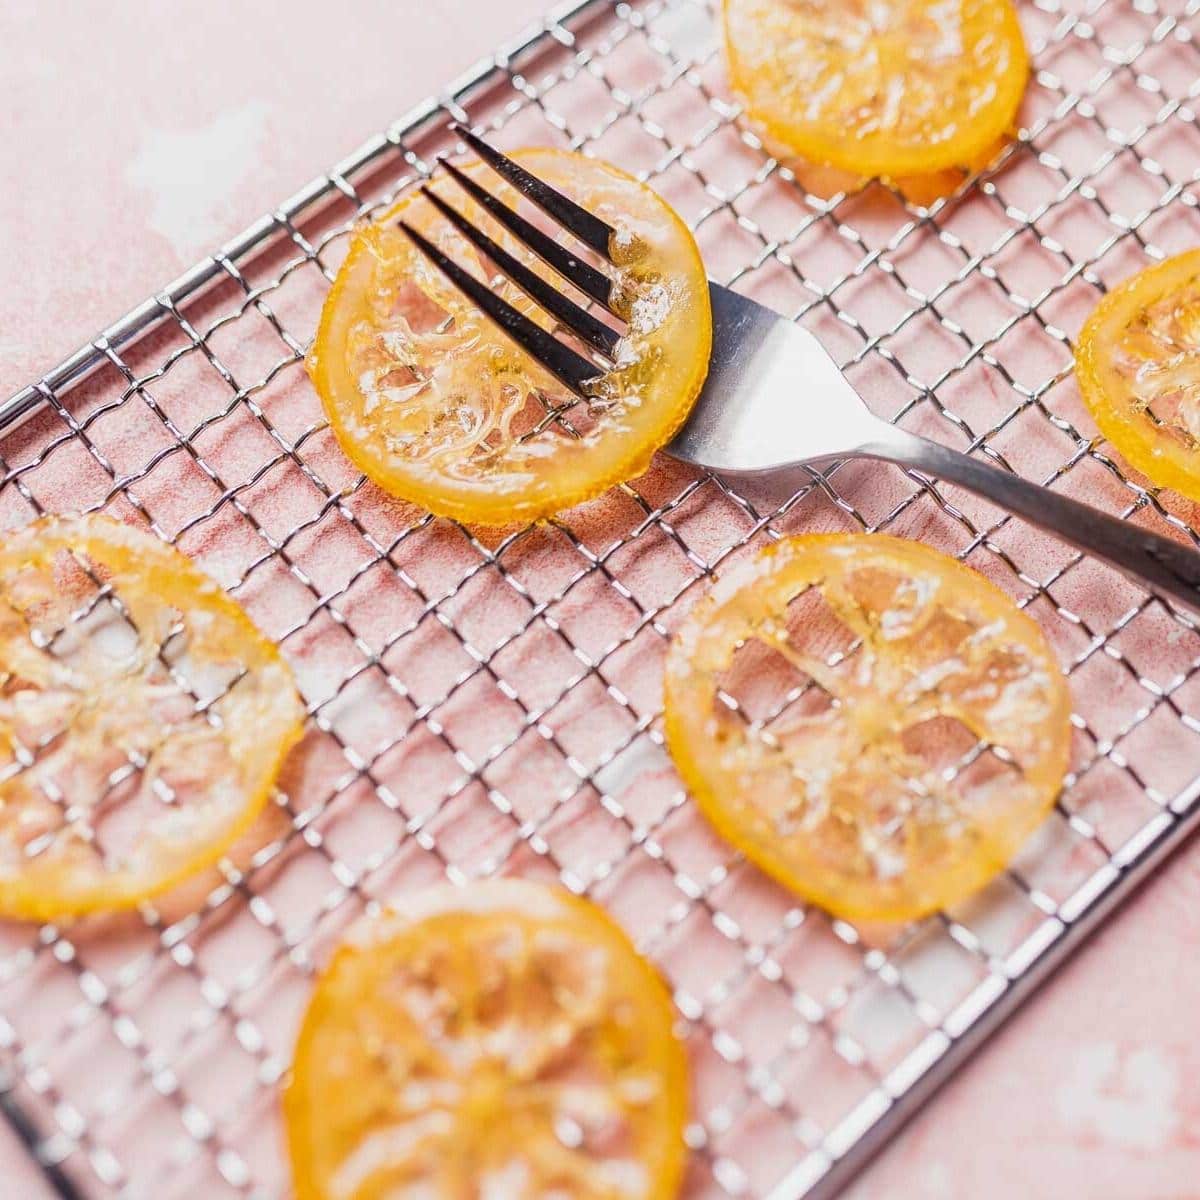 Candied lemon slices resting on a silver metal rack with a silver spoon poking through one of them.